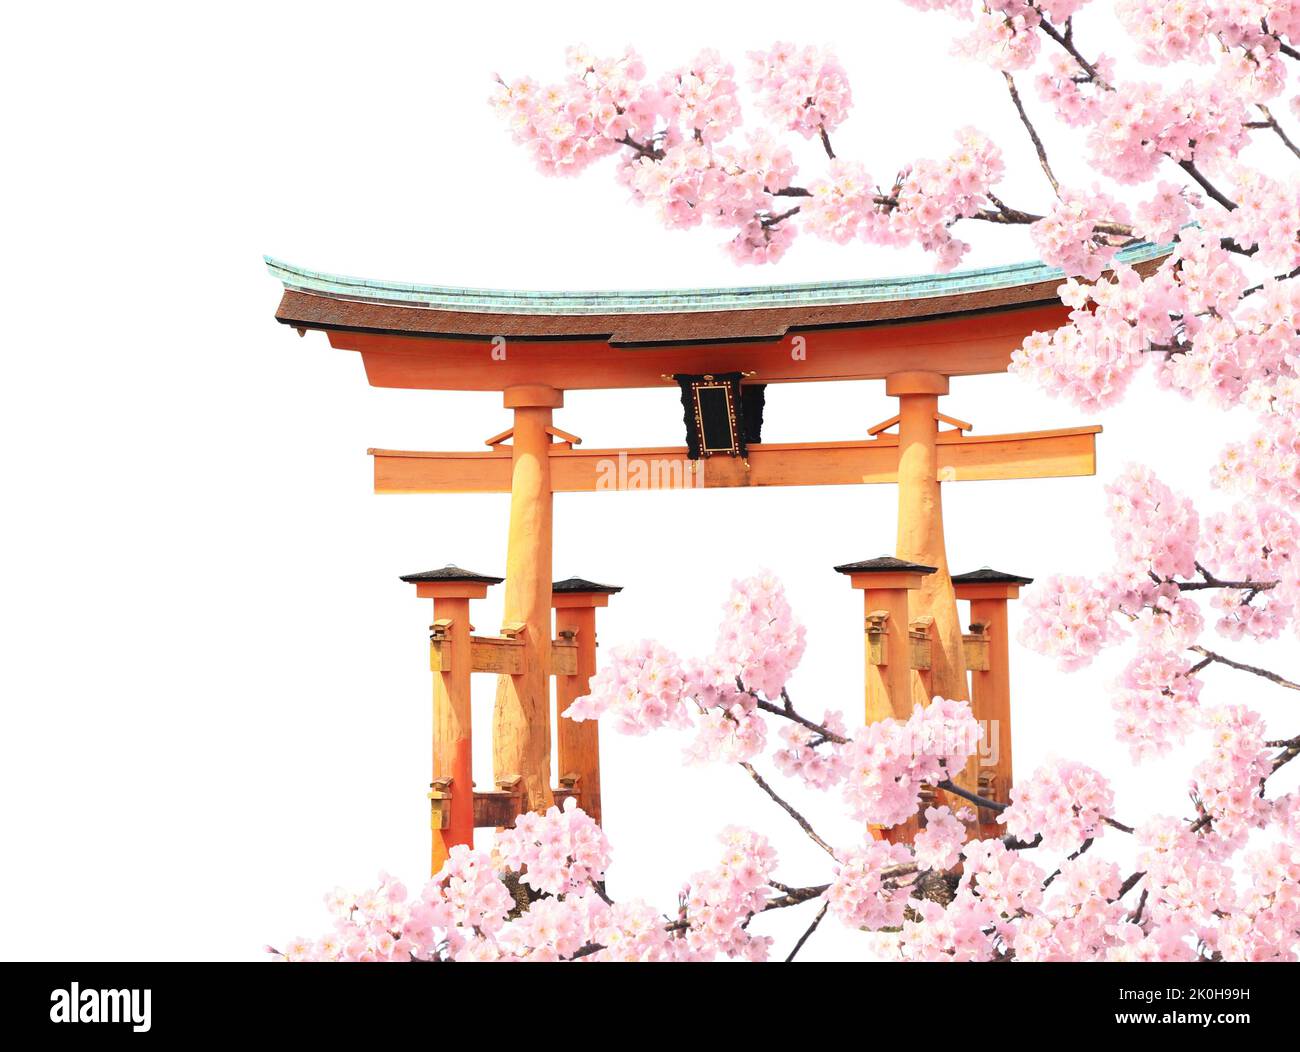 Branch of the blooming sakura with pink flowers and Torii gate. Spring sakura blossoming season in Japan. Isolated on white background Stock Photo